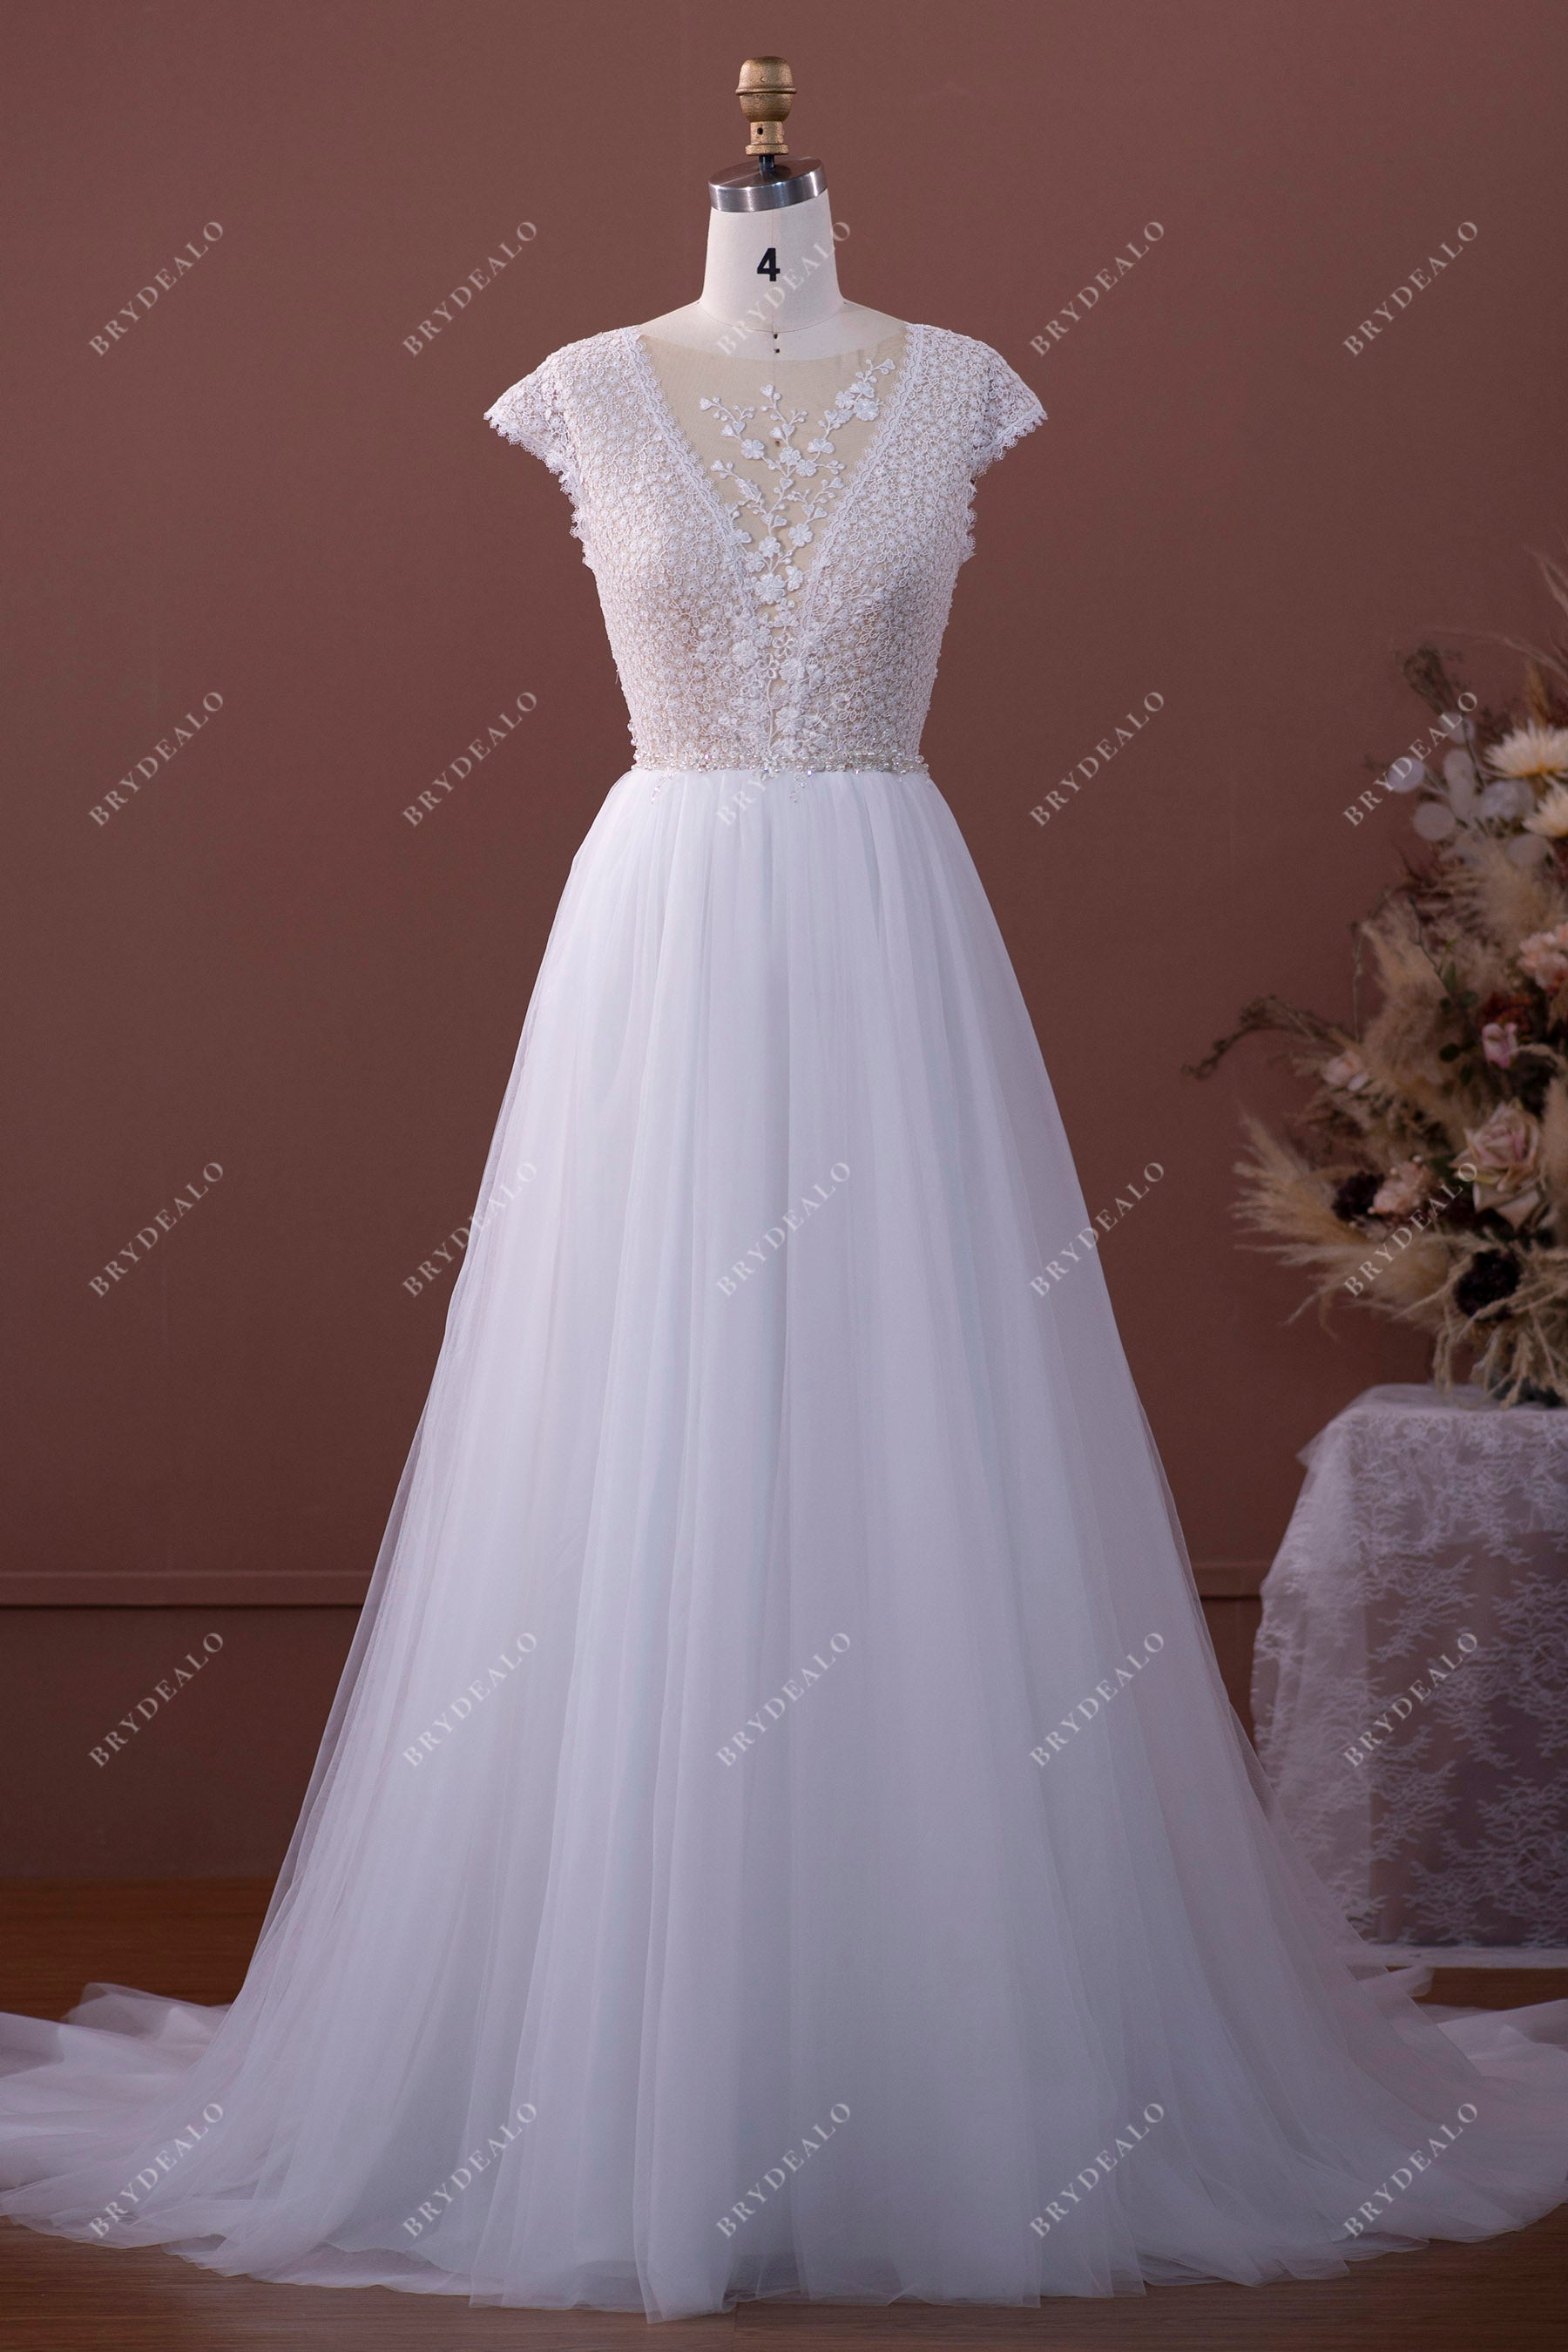 Sample Sale | Cap Sleeve Illusion Floral Lace Tulle Bridal Gown